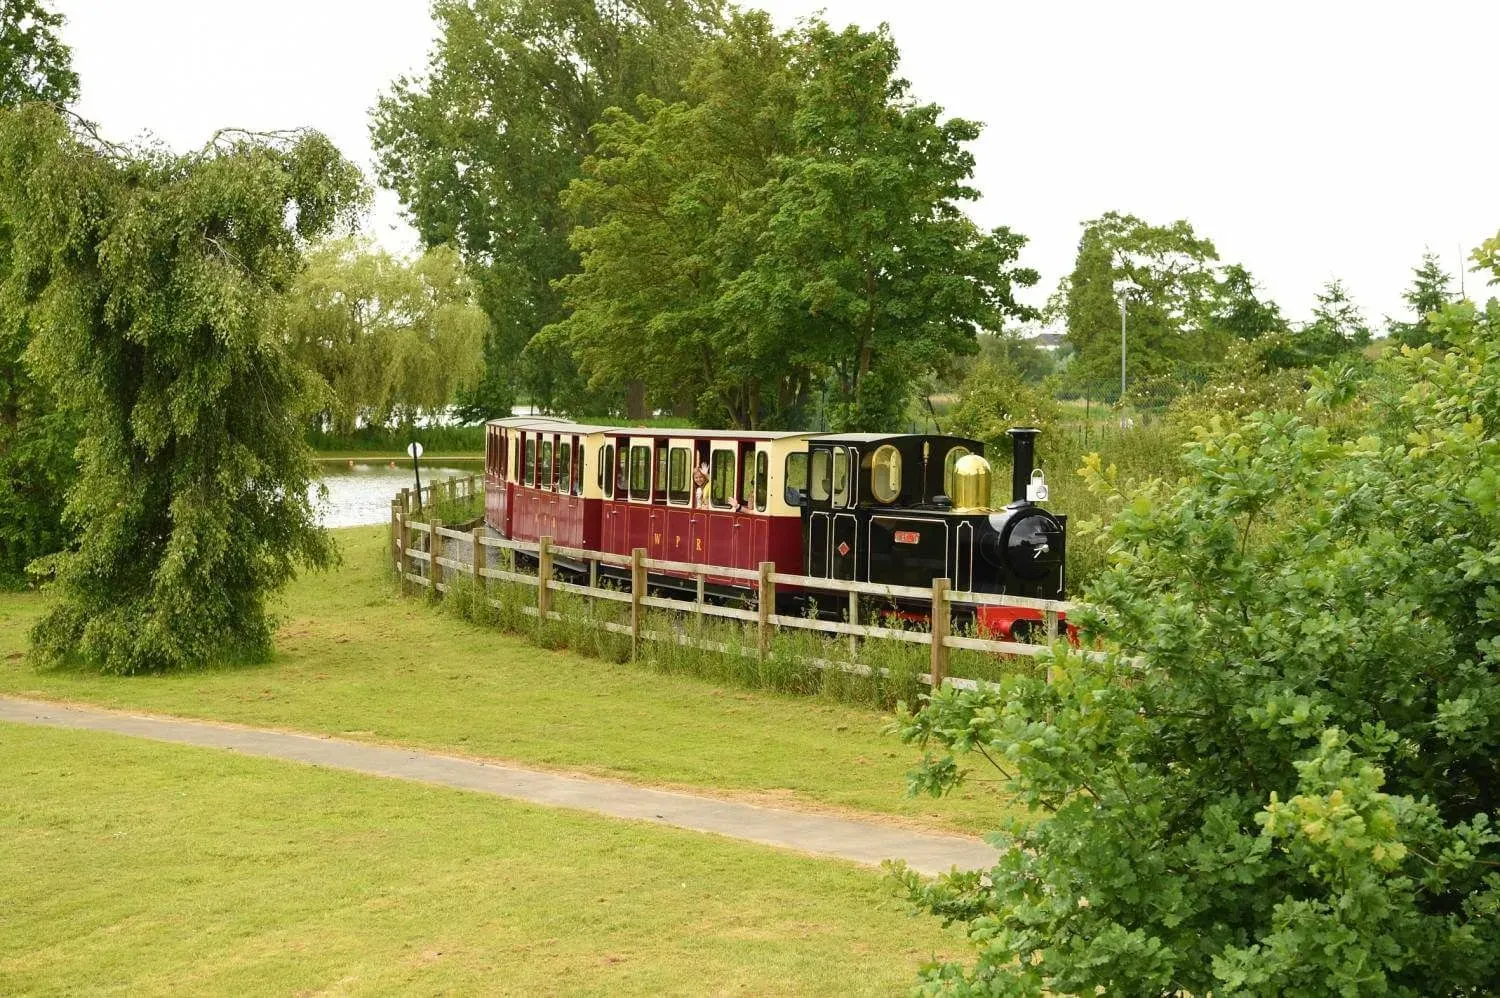 The train at Wicksteed Park among greenery